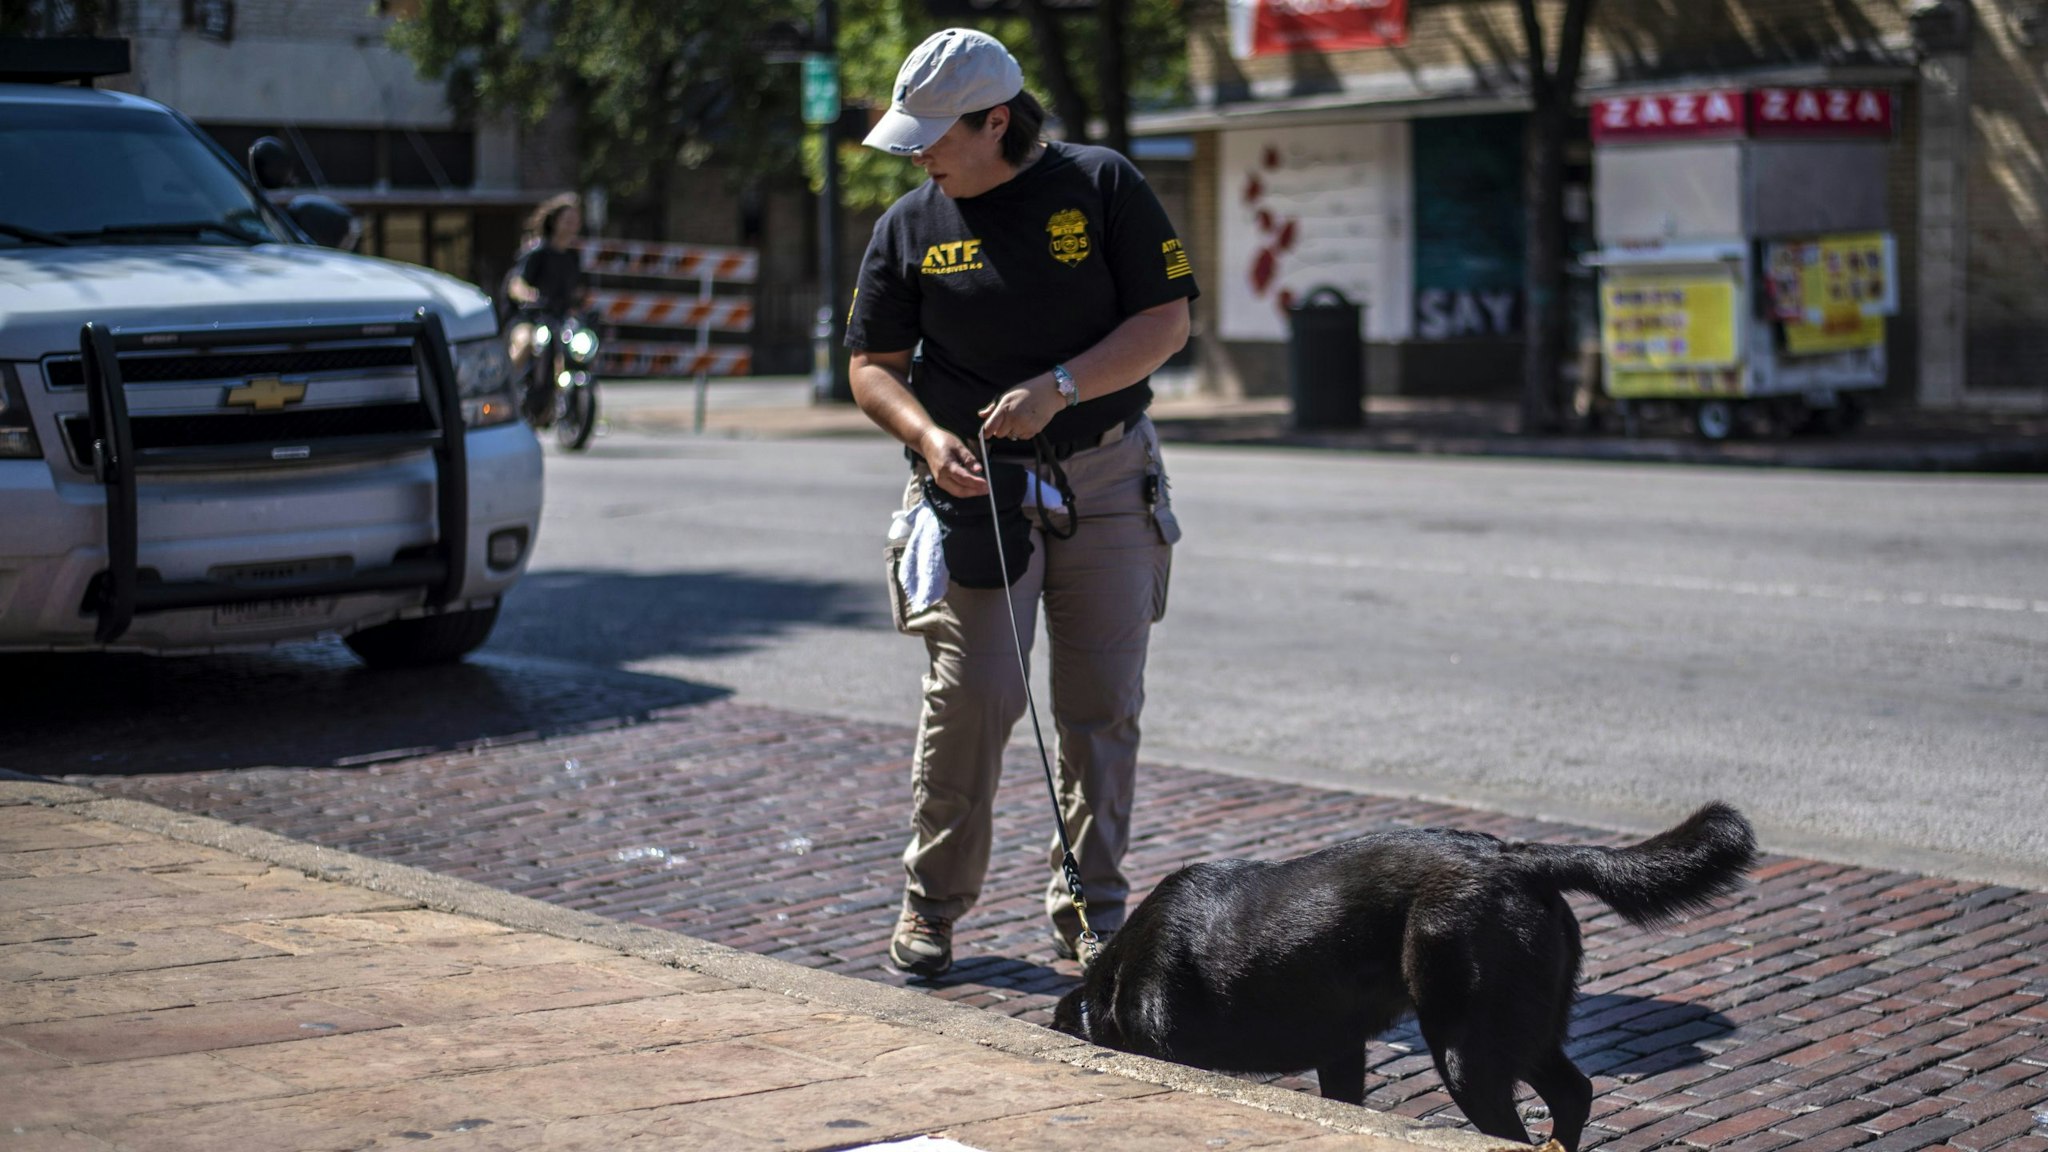 AUSTIN, TX - JUNE 12: An ATF K9 unit surveys the area near the scene of a shooting on June 12, 2021 in Austin, Texas. At least 13 people were taken to hospitals after a shooting happened on Austin's famous 6th Street. The shooter is still at large.